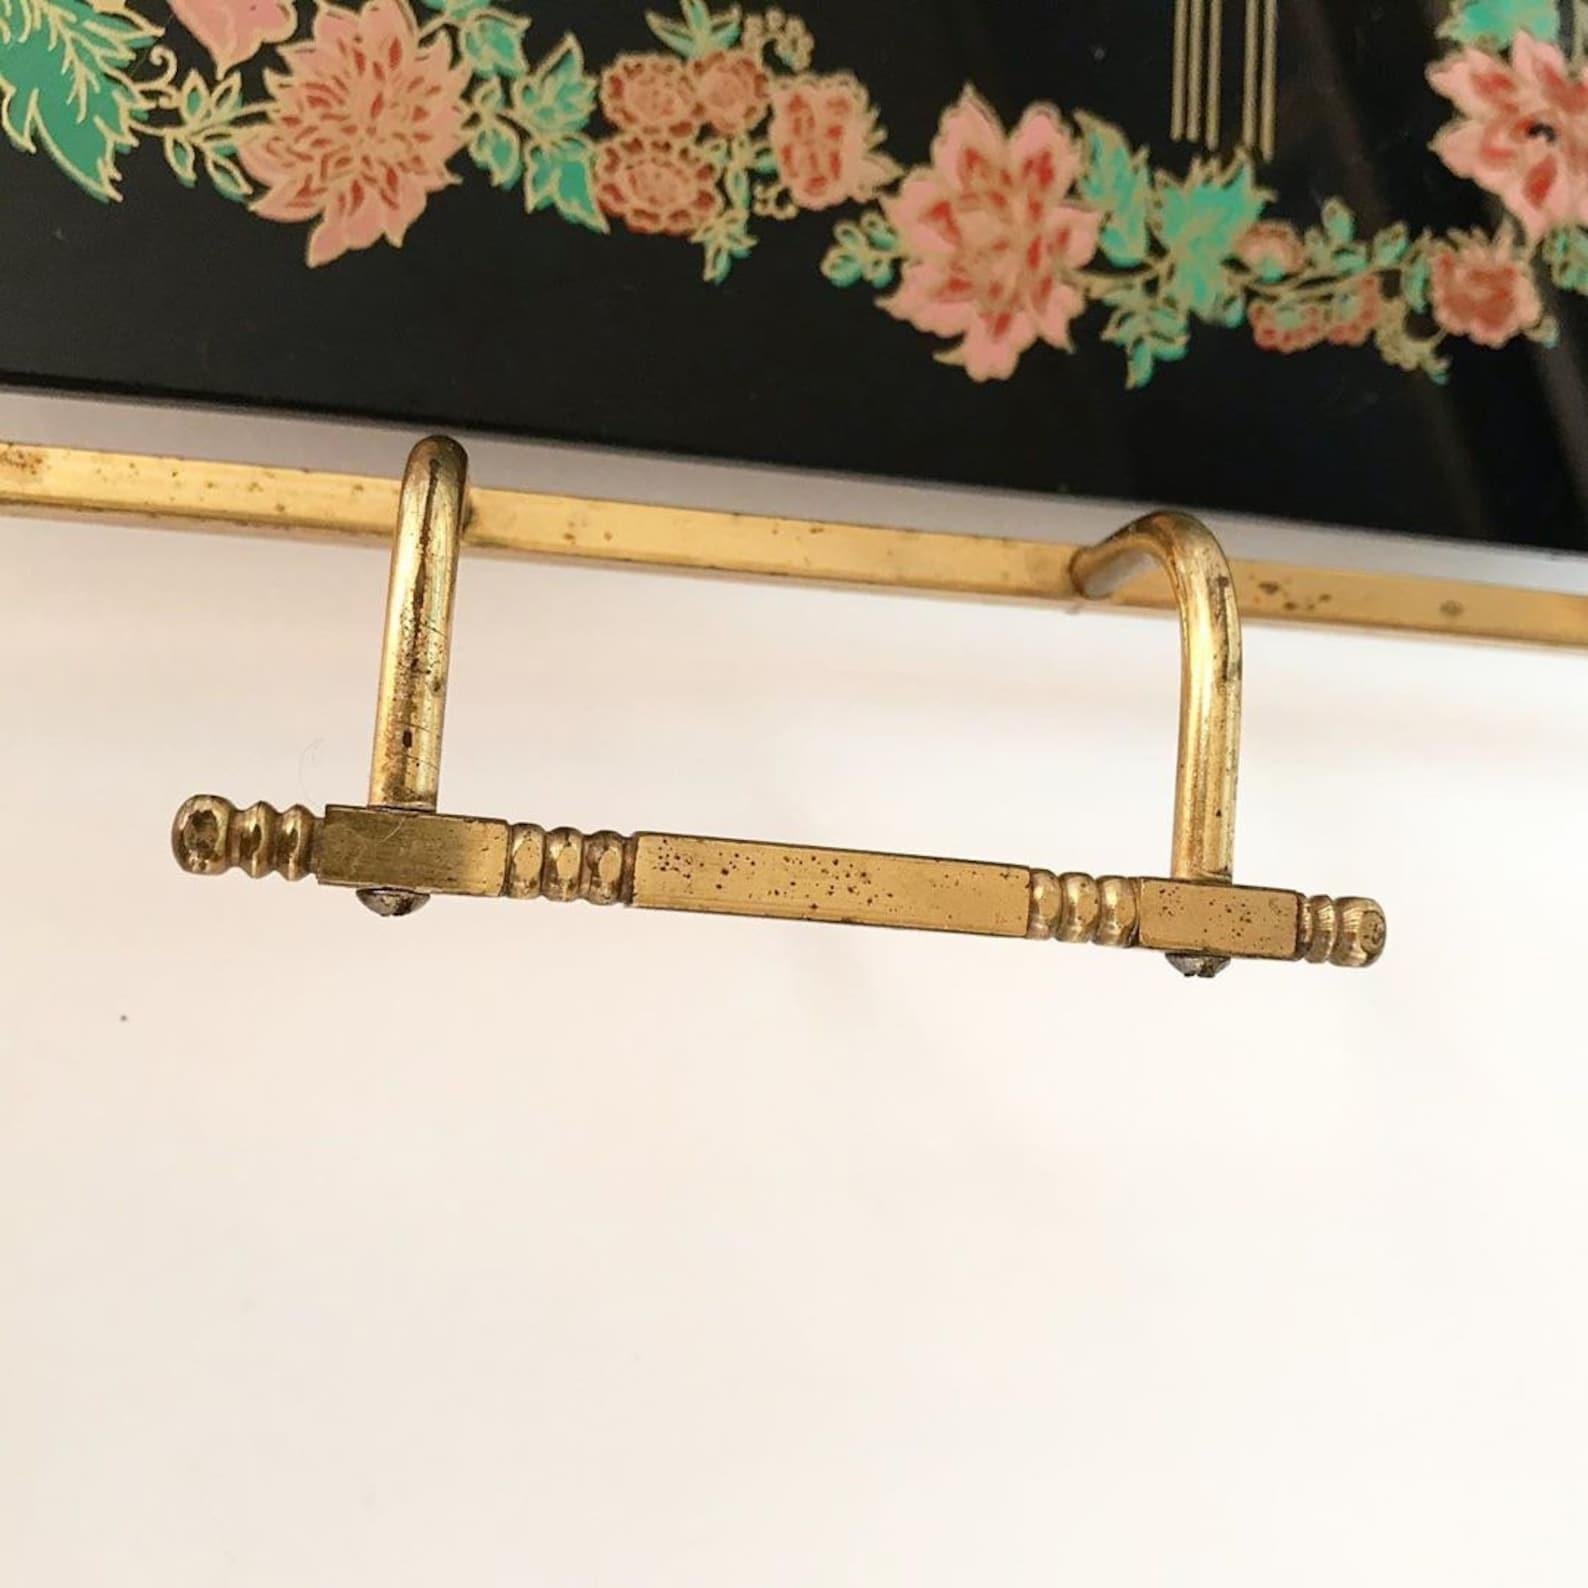 Beautiful elegant antique tray with handles. 

The frame is made of brass. 

The base is glass. 

The legs are unscrewed. 

Good antique condition, no chips. 

Sizes: 14.5 x 9.8 inch (37 cm ? 25 cm) - (sizes of glass part). 

Length of